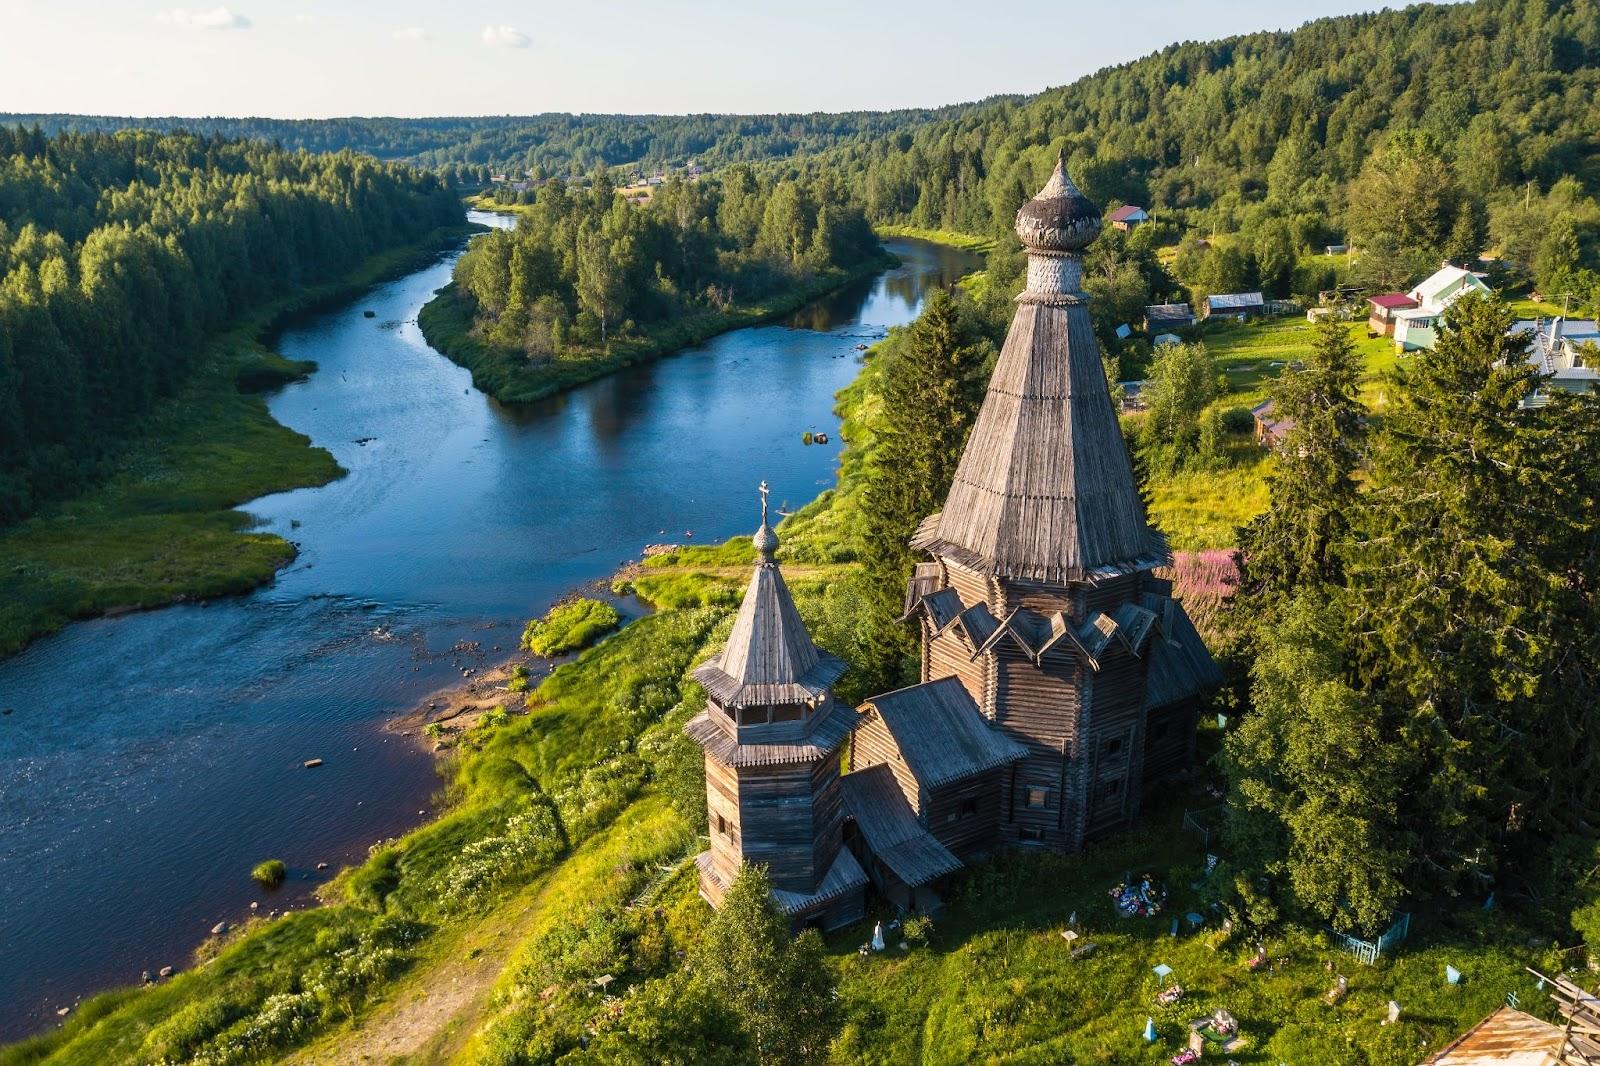 Bird's eye view of the Church of St. Nicholas (built 1696) in Soginicy village and Vazhinka river, Podporozhysky district. Green forests of Leningrad region and Republic of Karelia, Russia.